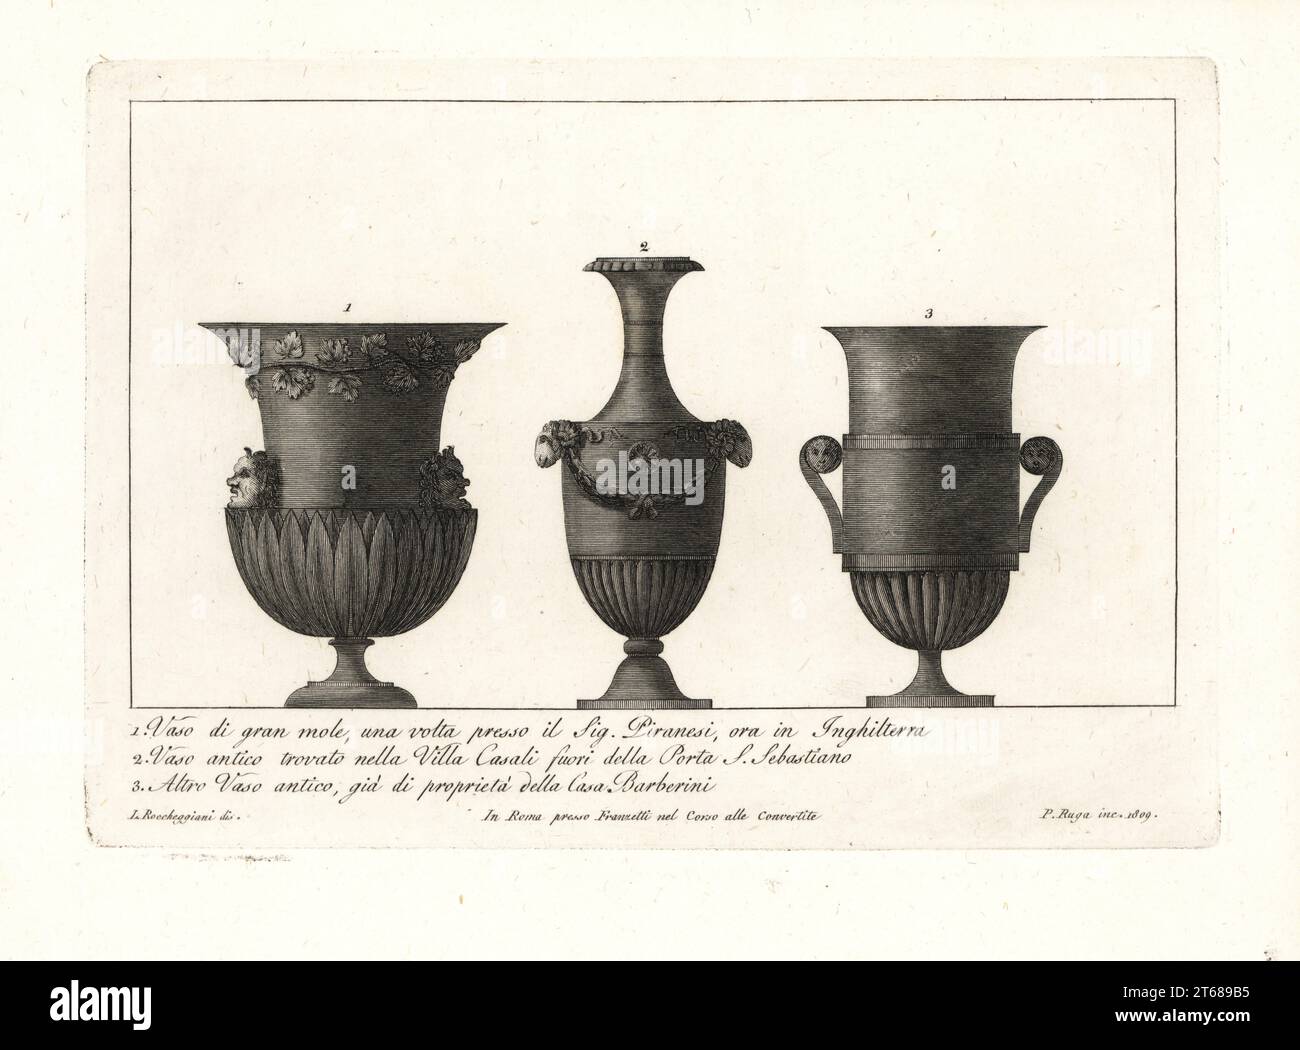 Large vase with satyr heads, once owned by the artist Giovanni Battista Piranesi 1, ancient vase with ram's heads found in the Villa Casali outside Porta San Sebastiano 2, and ancient vase from the Casa Barberini 3. Copperplate engraving by Pietro Ruga after an illustration by Lorenzo Rocceggiani from his own 100 Plates of Costumes Religious, Civil and Military of the Ancient Egyptians, Etruscans, Greeks and Romans, Franzetti, Rome, 1802. Stock Photo